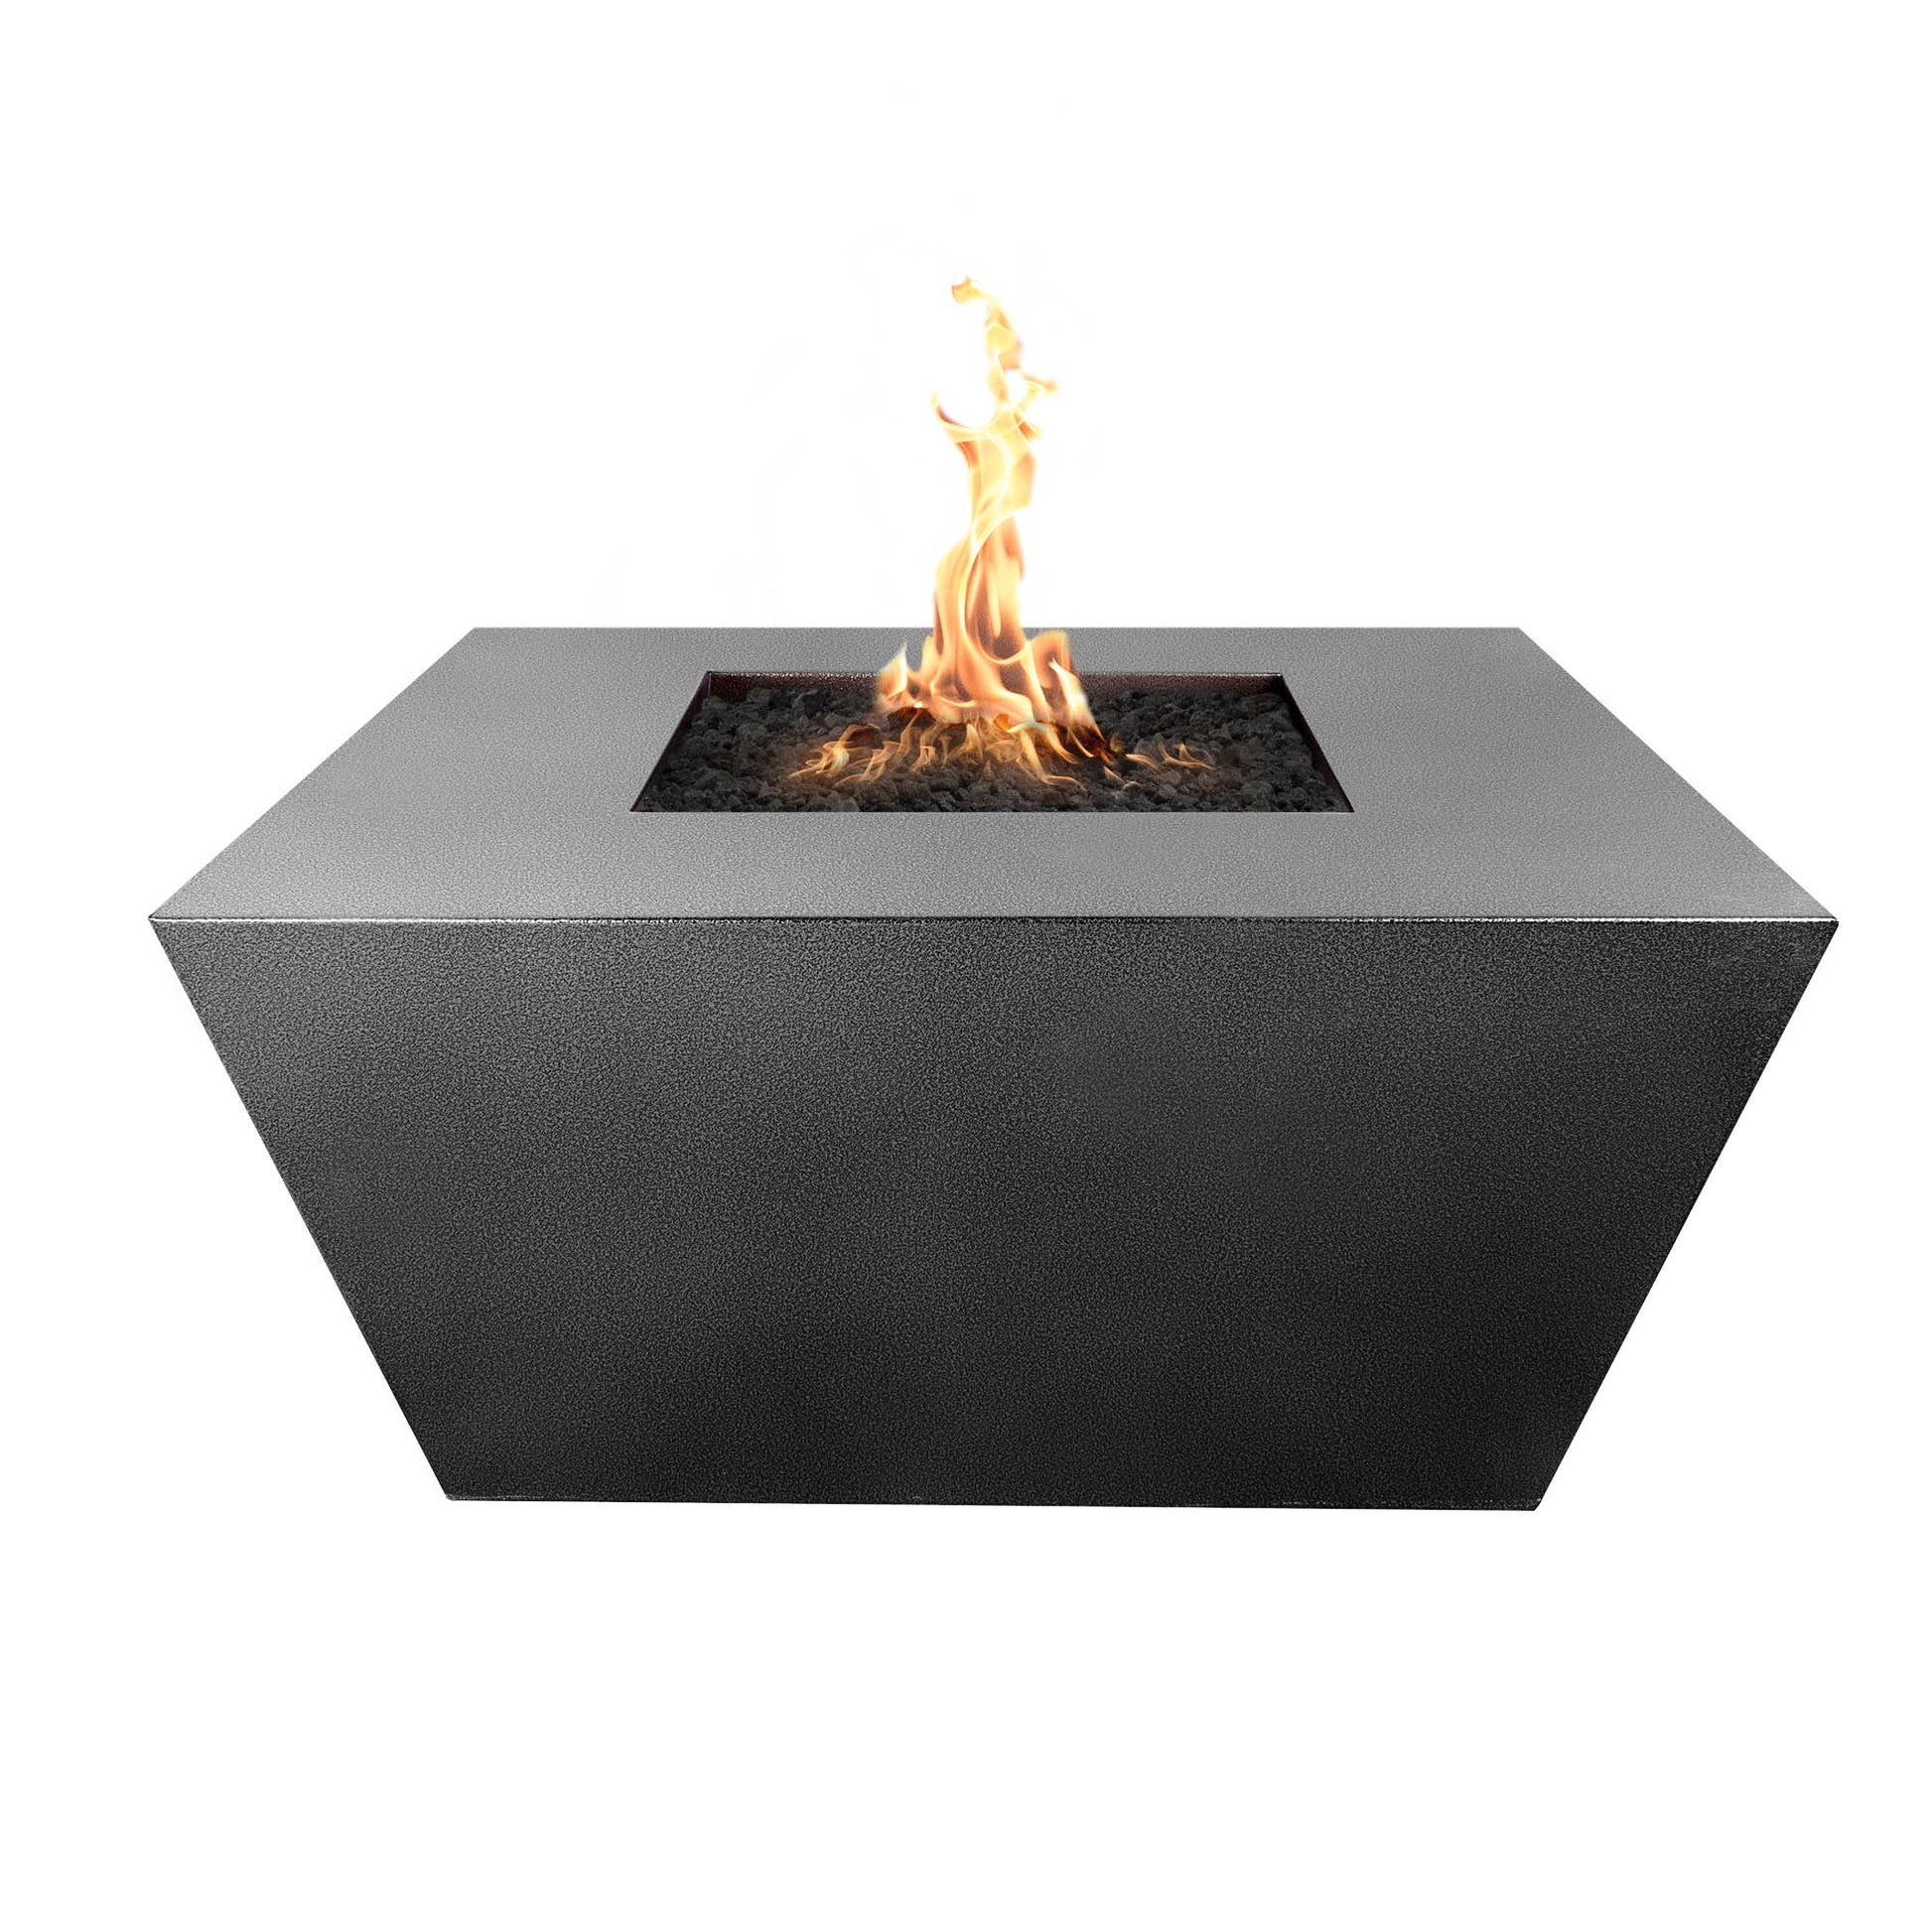 The Outdoor Plus Square Redan 48" Java Powder Coated Metal Liquid Propane Fire Pit with Match Lit Ignition